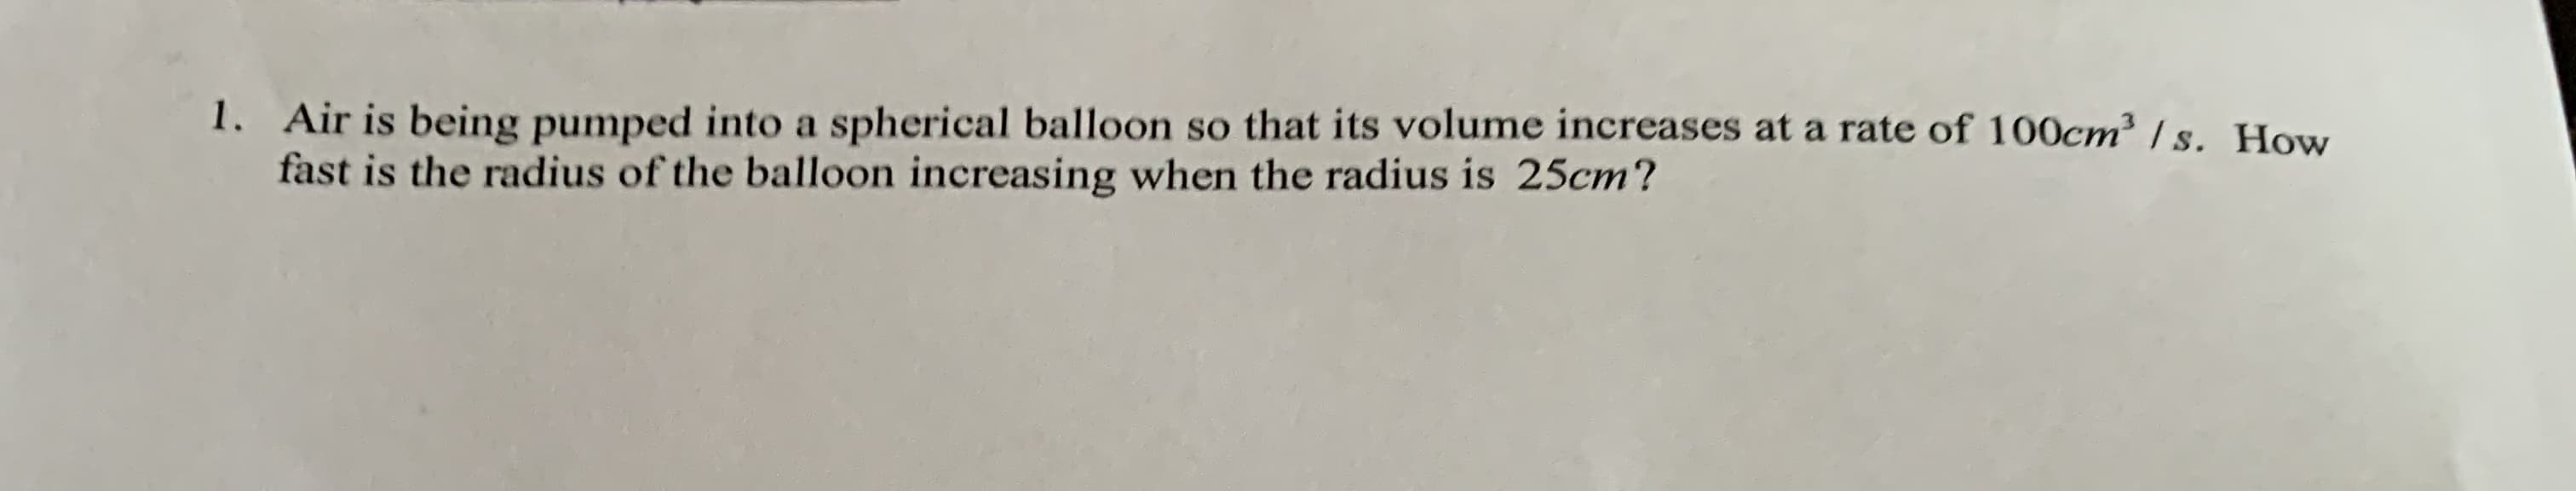 1. Air is being pumped into a spherical balloon so that its volume increases at a rate of 100cm³ / s. How
fast is the radius of the balloon increasing when the radius is 25cm?
